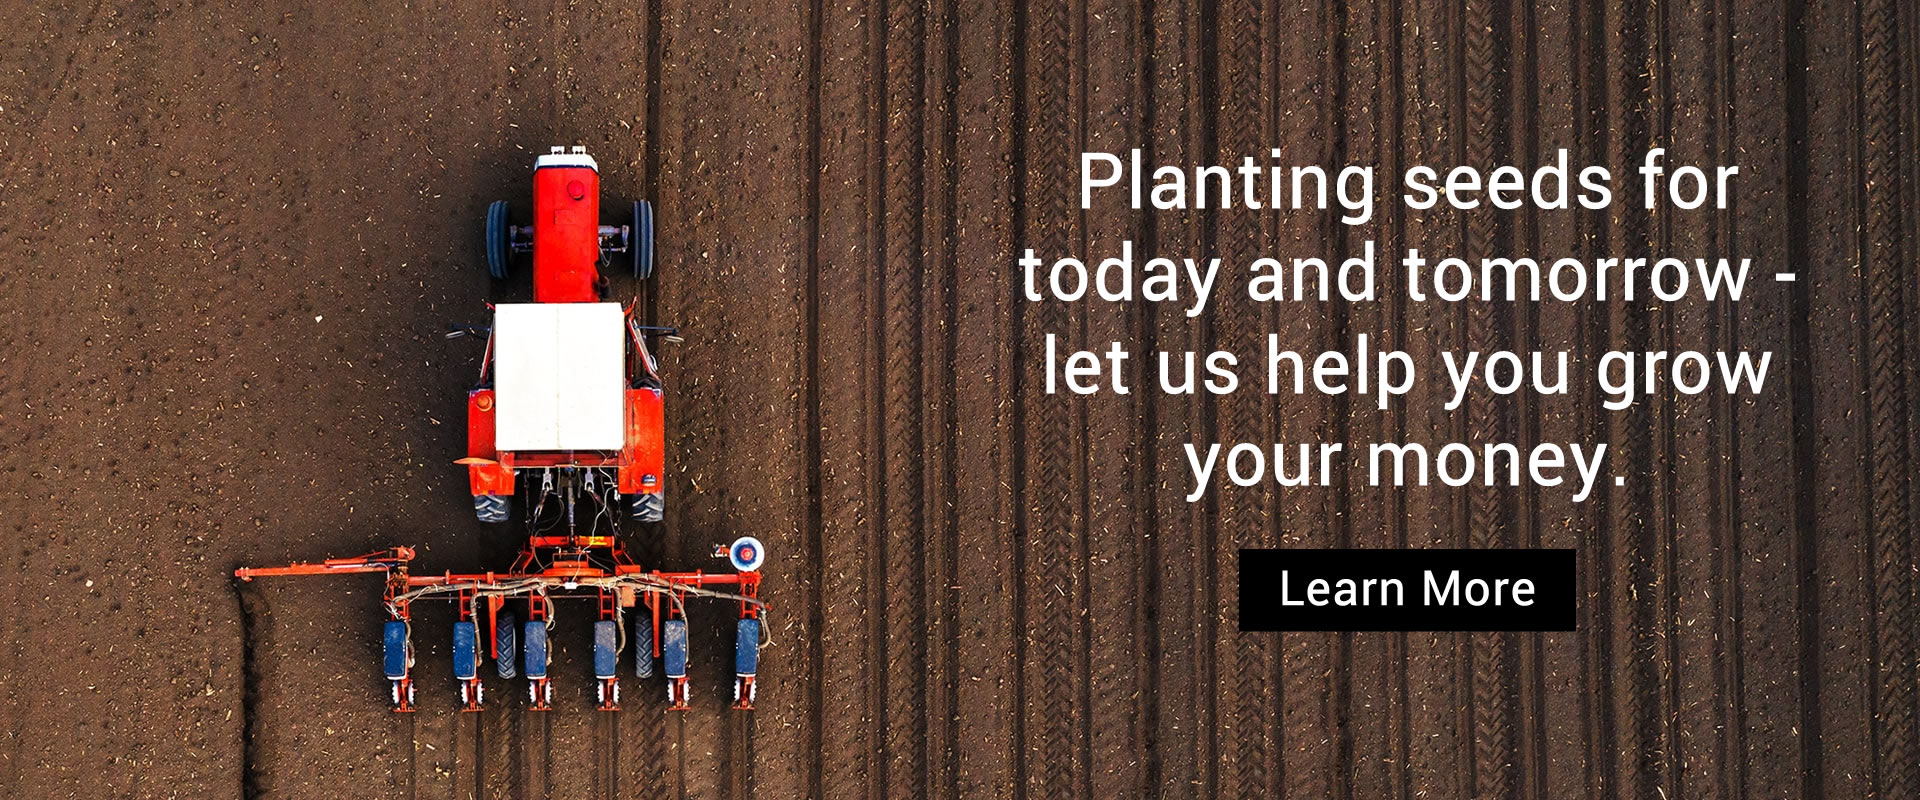 Planting seeds for today and tomorrow - let us help you grow your money. Learn More